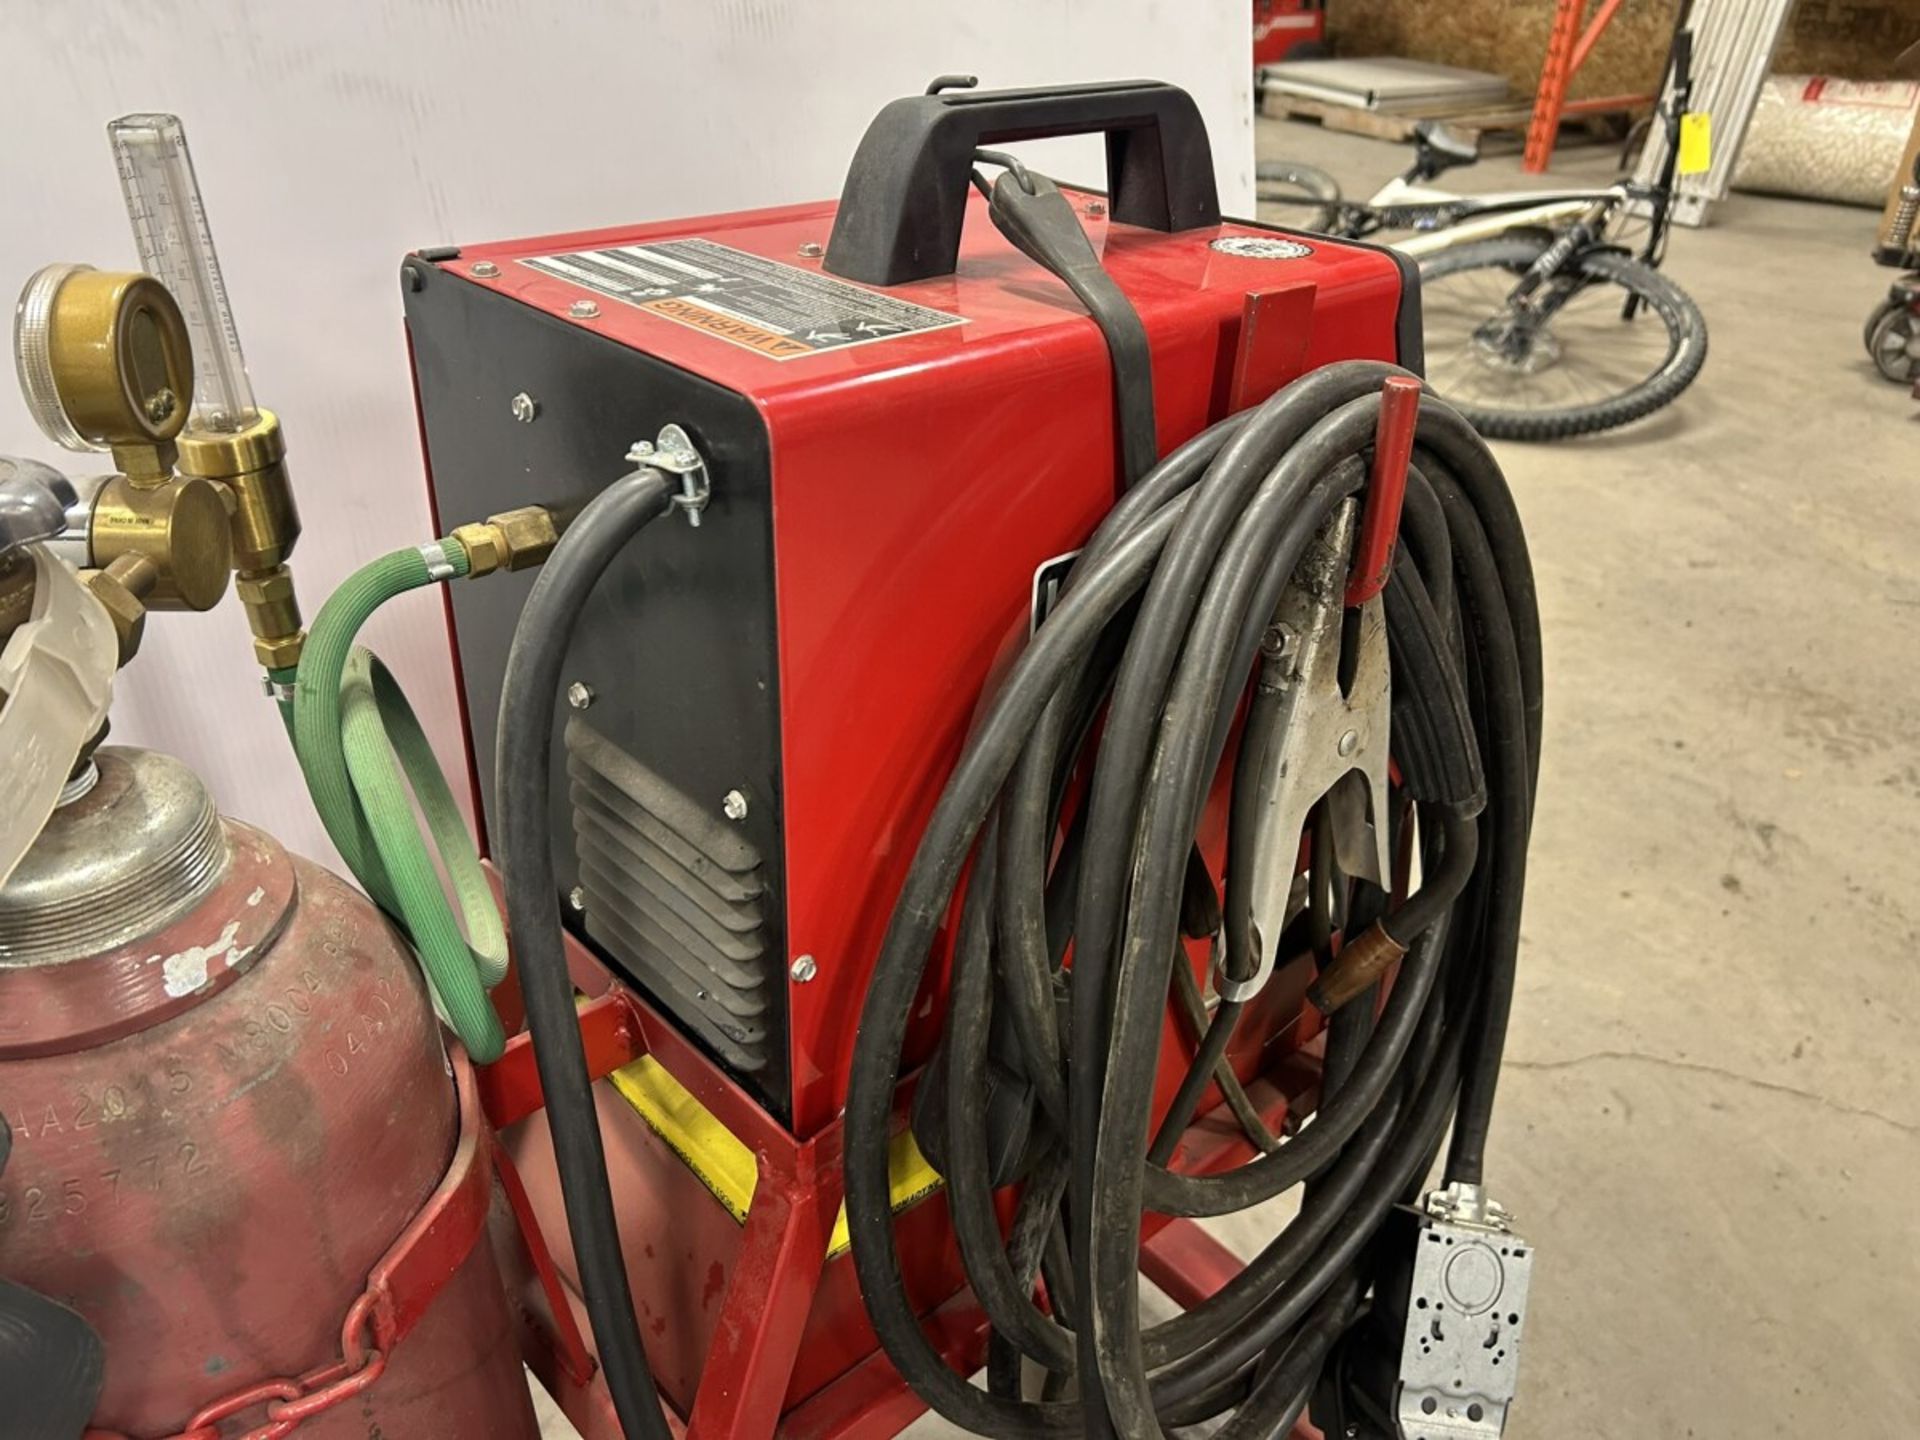 LINCOLN ELECTRIC SP-170T MIG WELDING POWER SOURCE W/ CABLES, CART AND BOTTLE S/N 10261-U1970905182 - Image 5 of 9